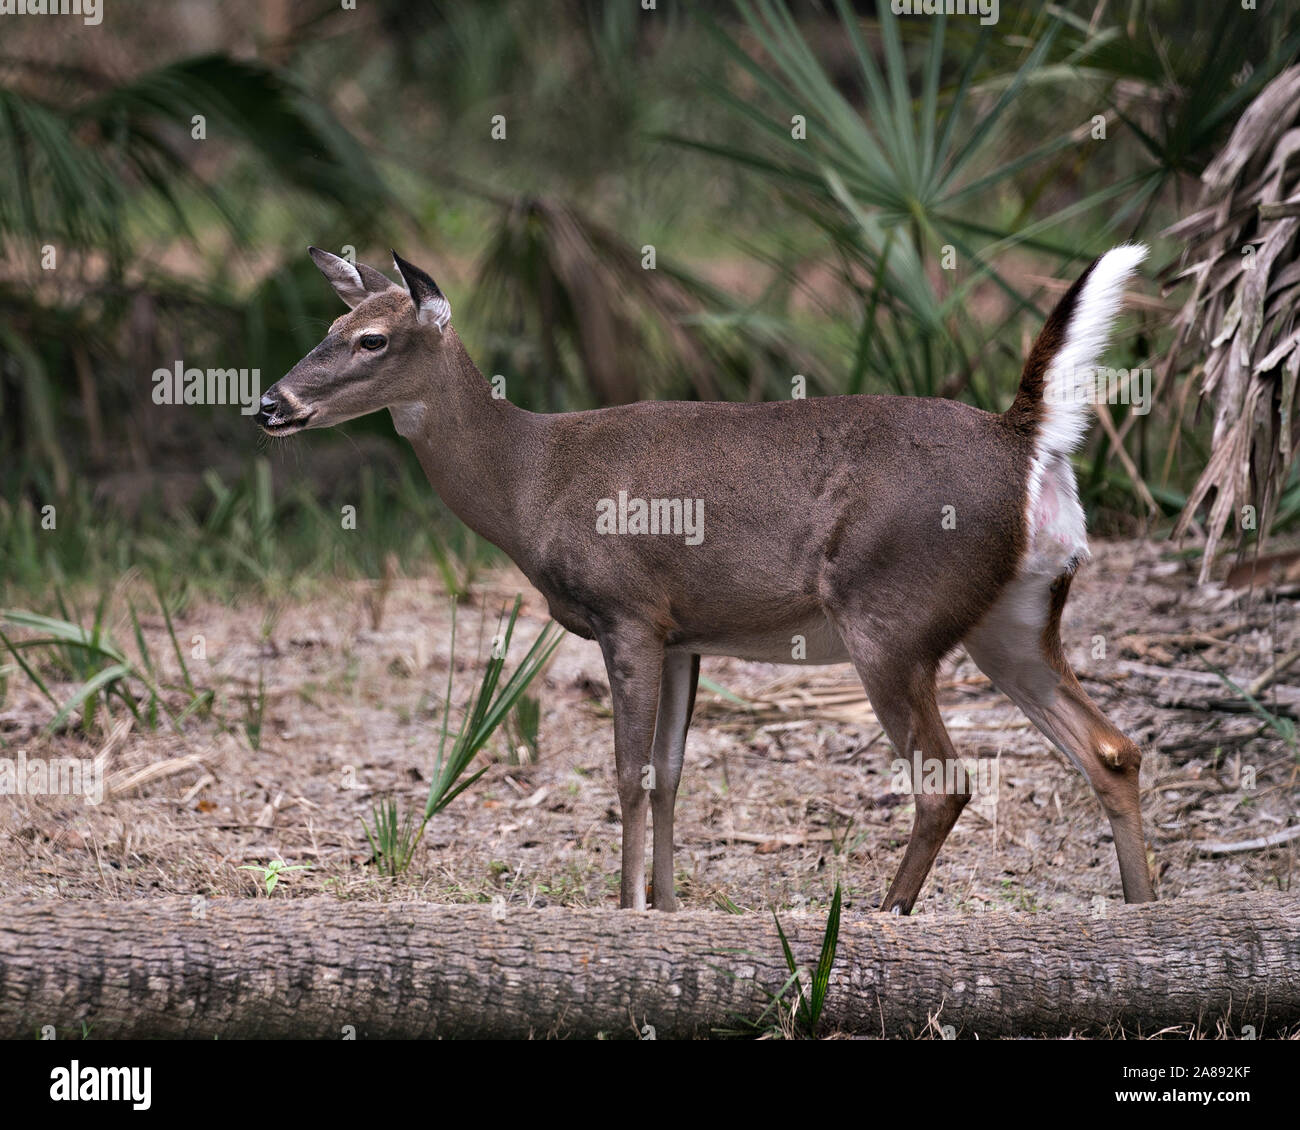 Deer (White Tailed Deer) close-up view walking in the field exposing its body, head, ears, eyes, nose, legs, in its environment and surrounding. Stock Photo